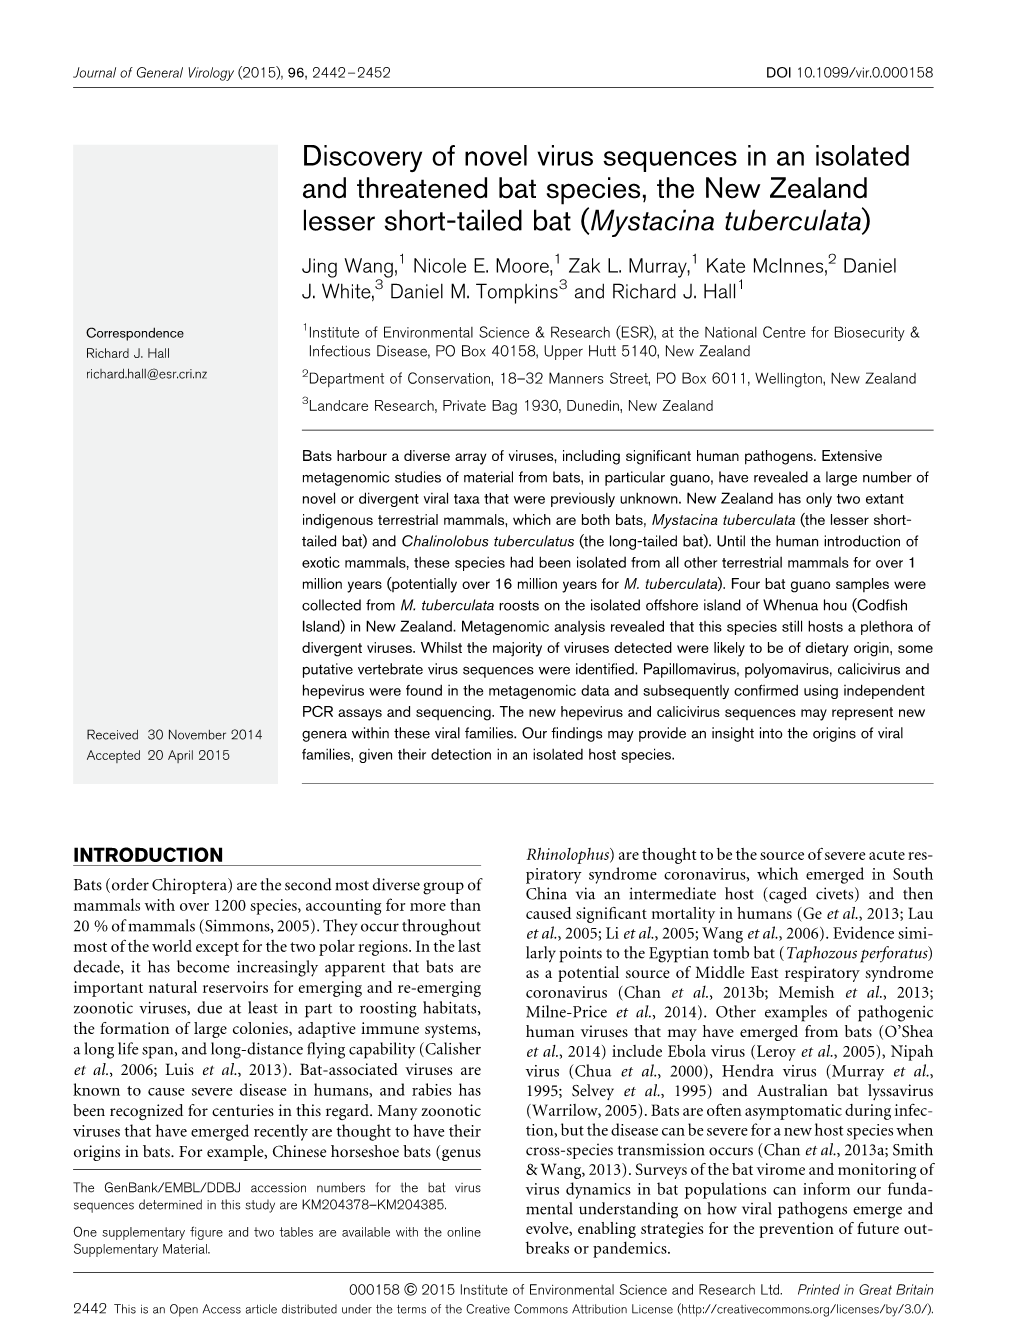 Discovery of Novel Virus Sequences in an Isolated and Threatened Bat Species, the New Zealand Lesser Short-Tailed Bat (Mystacina Tuberculata) Jing Wang,1 Nicole E